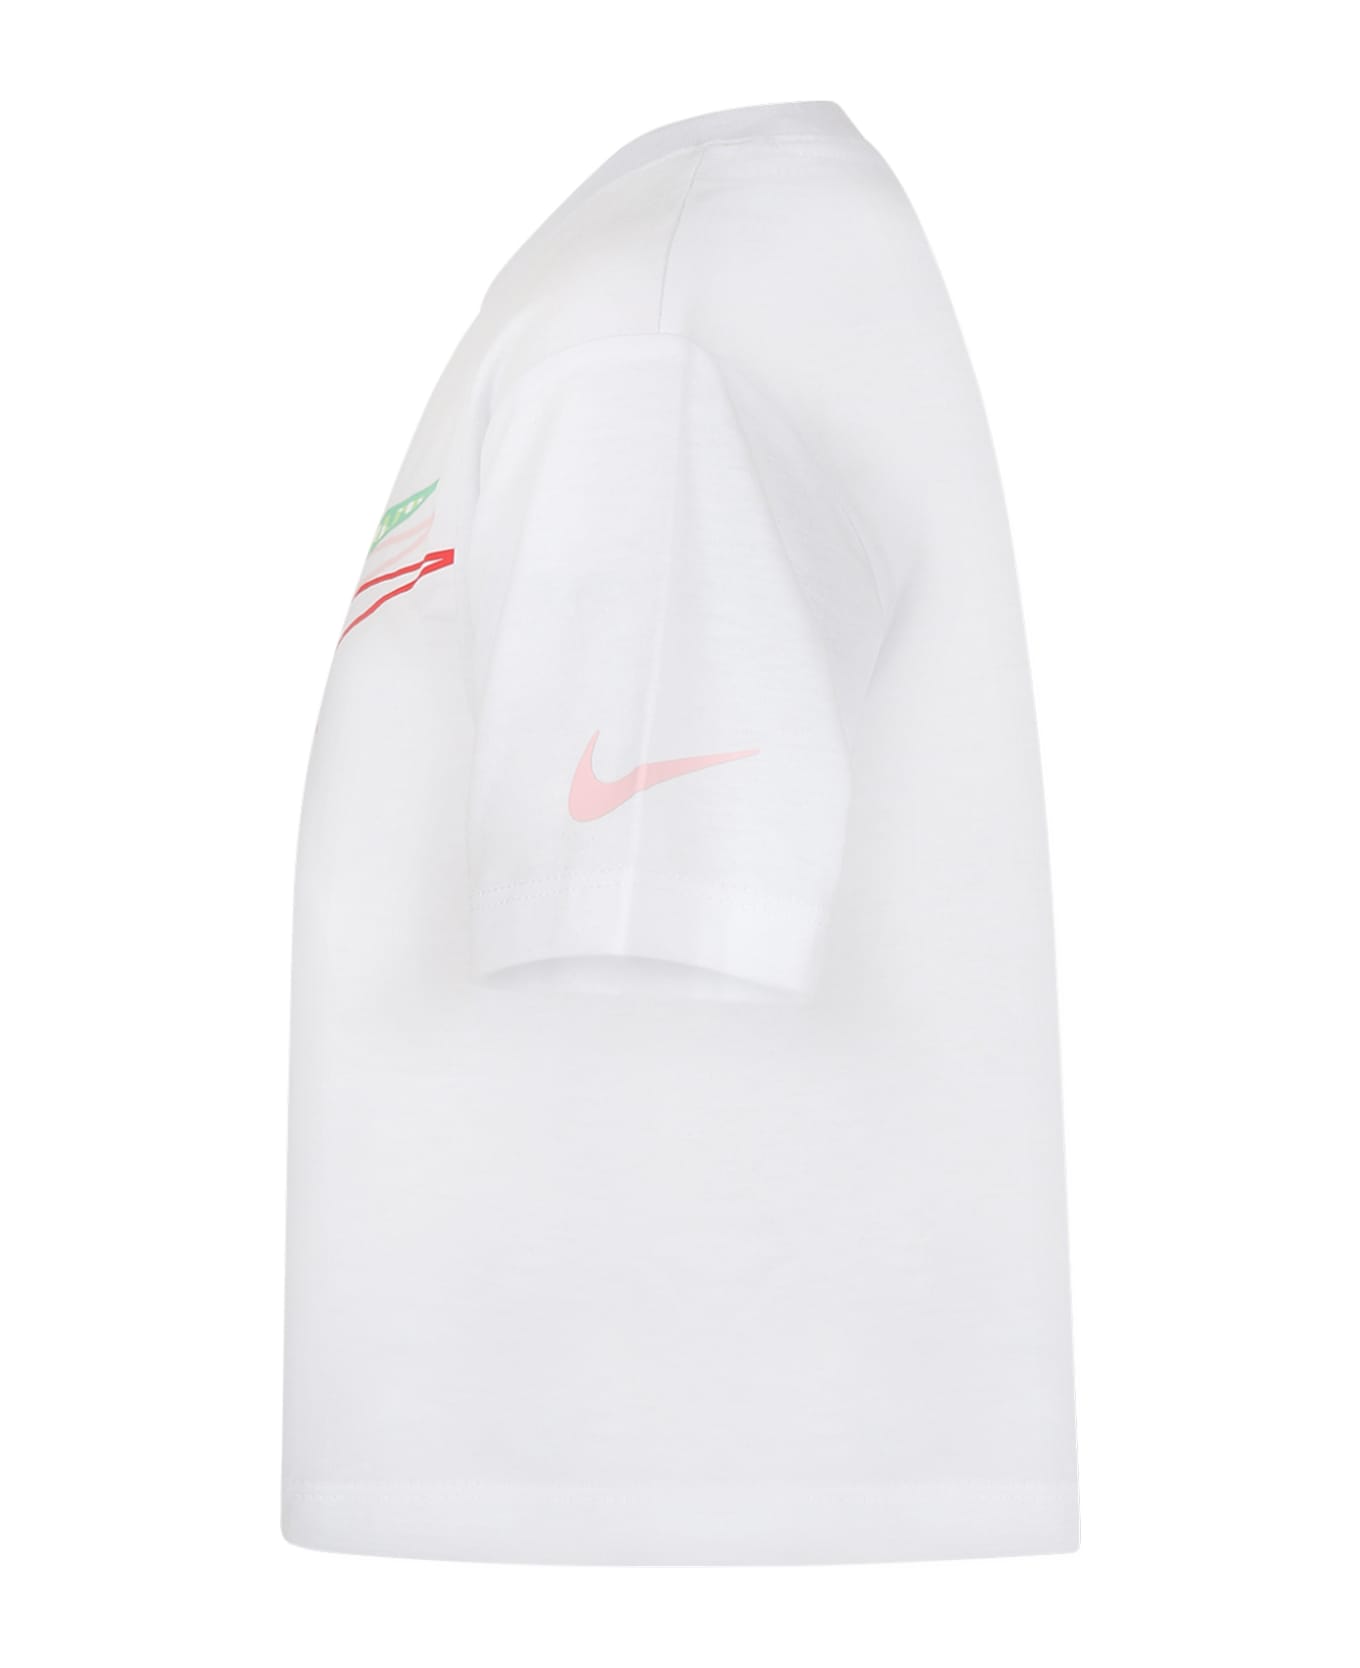 Nike White T-shirt For Girl With Iconic Swoosh - White